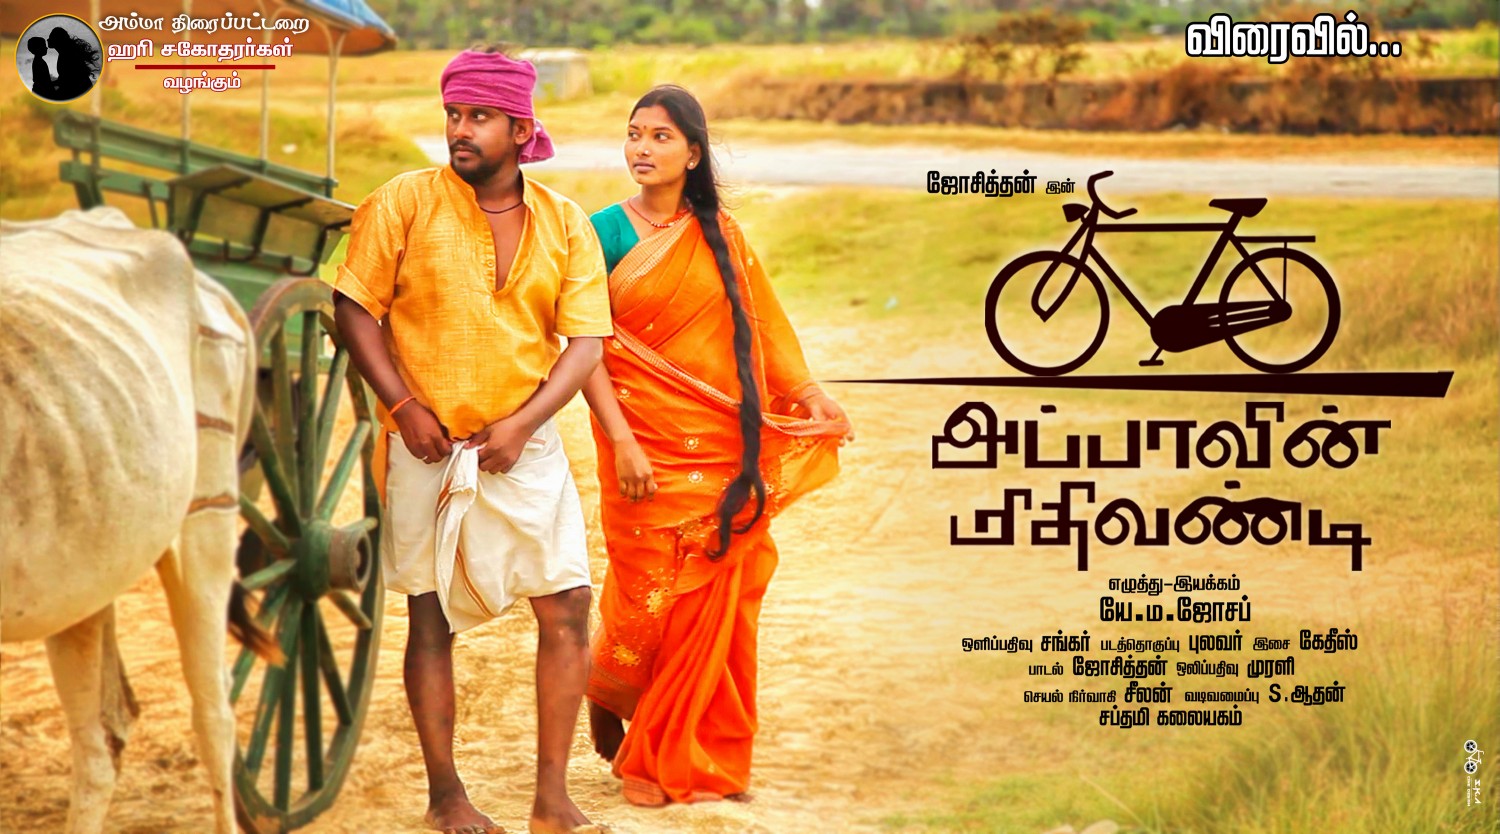 Extra Large Movie Poster Image for Appaavin Mithivandi